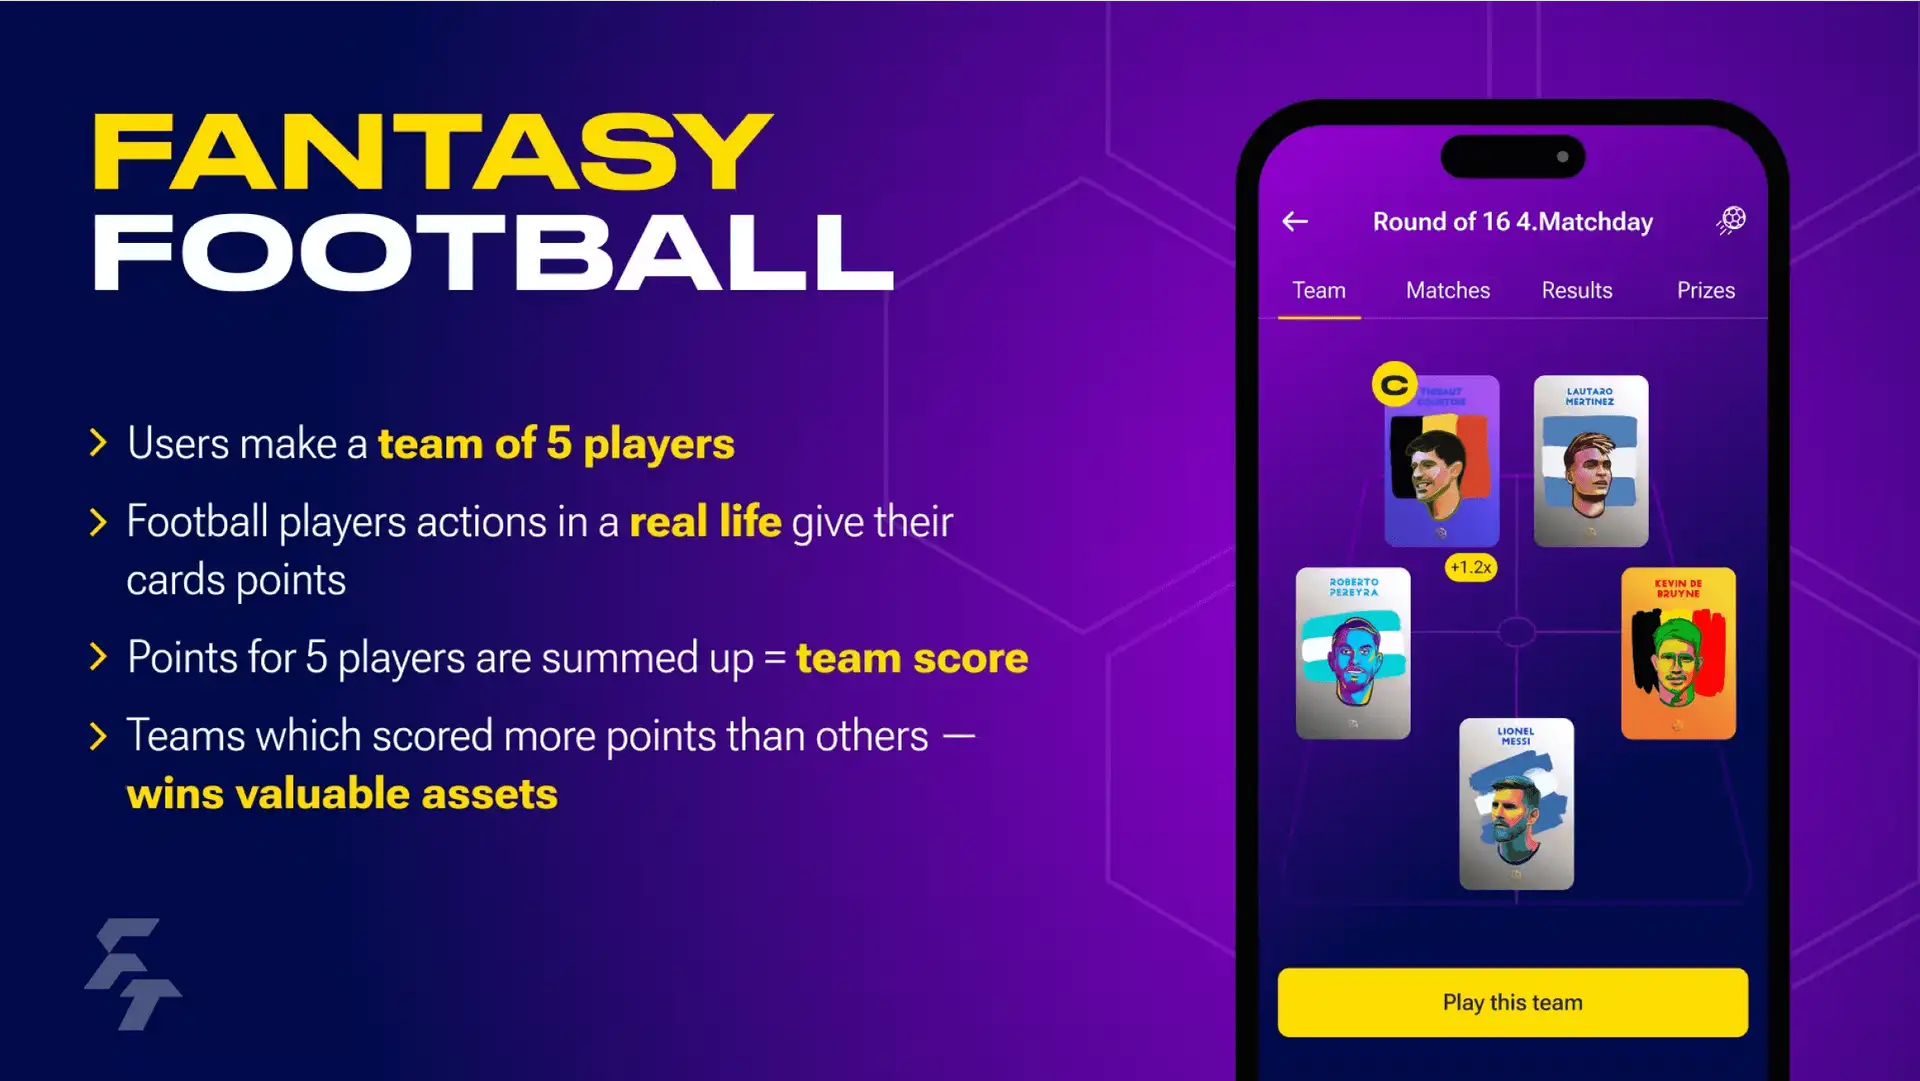 Fantasy football. Users make a team of 5 players; Football players actions in a real life give their cards points; Points for 5 players are summed up = team score; Teams which scored more points than others - wins valuable assets.